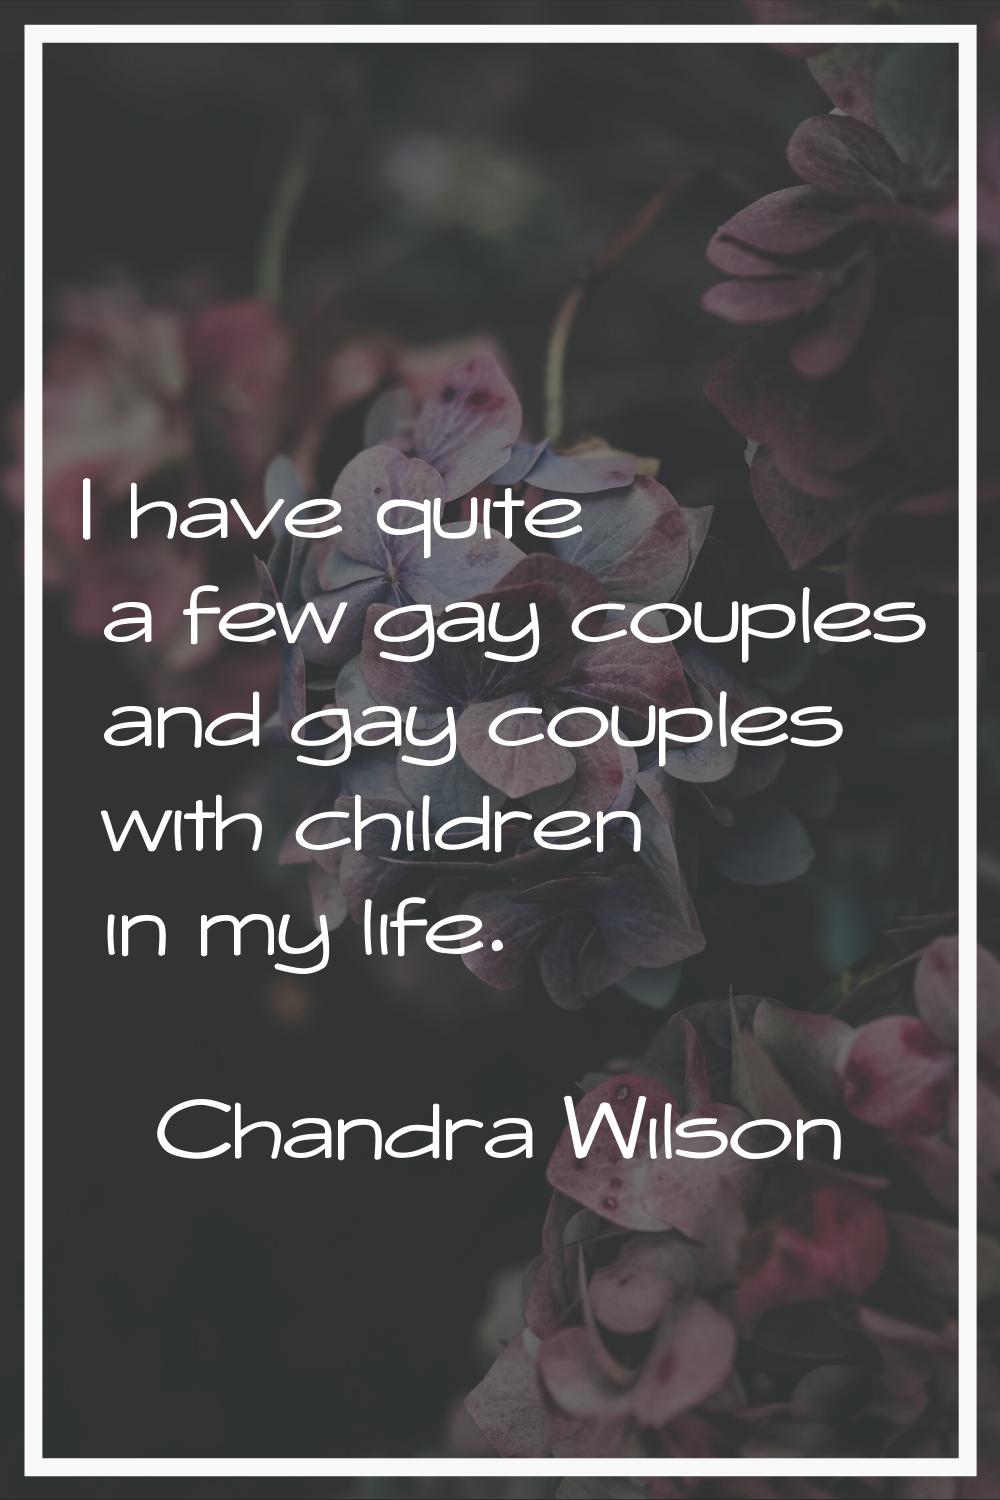 I have quite a few gay couples and gay couples with children in my life.